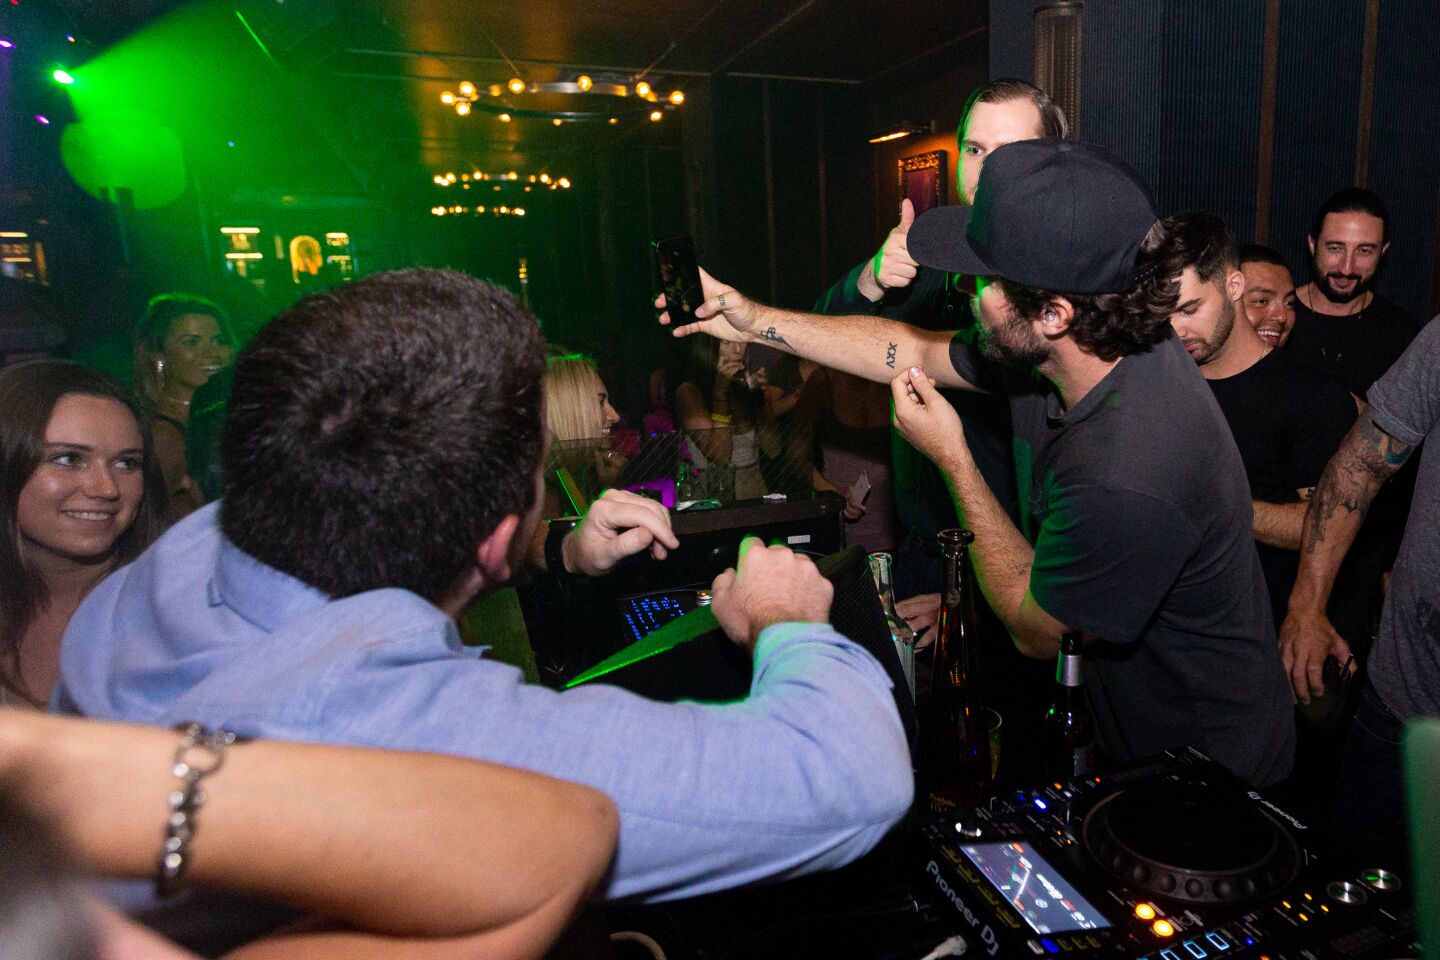 Brody Jenner took a break from "The Hills: New Beginnings" to spin at Oxford Social Club on Sunday, Sept. 1, 2019.